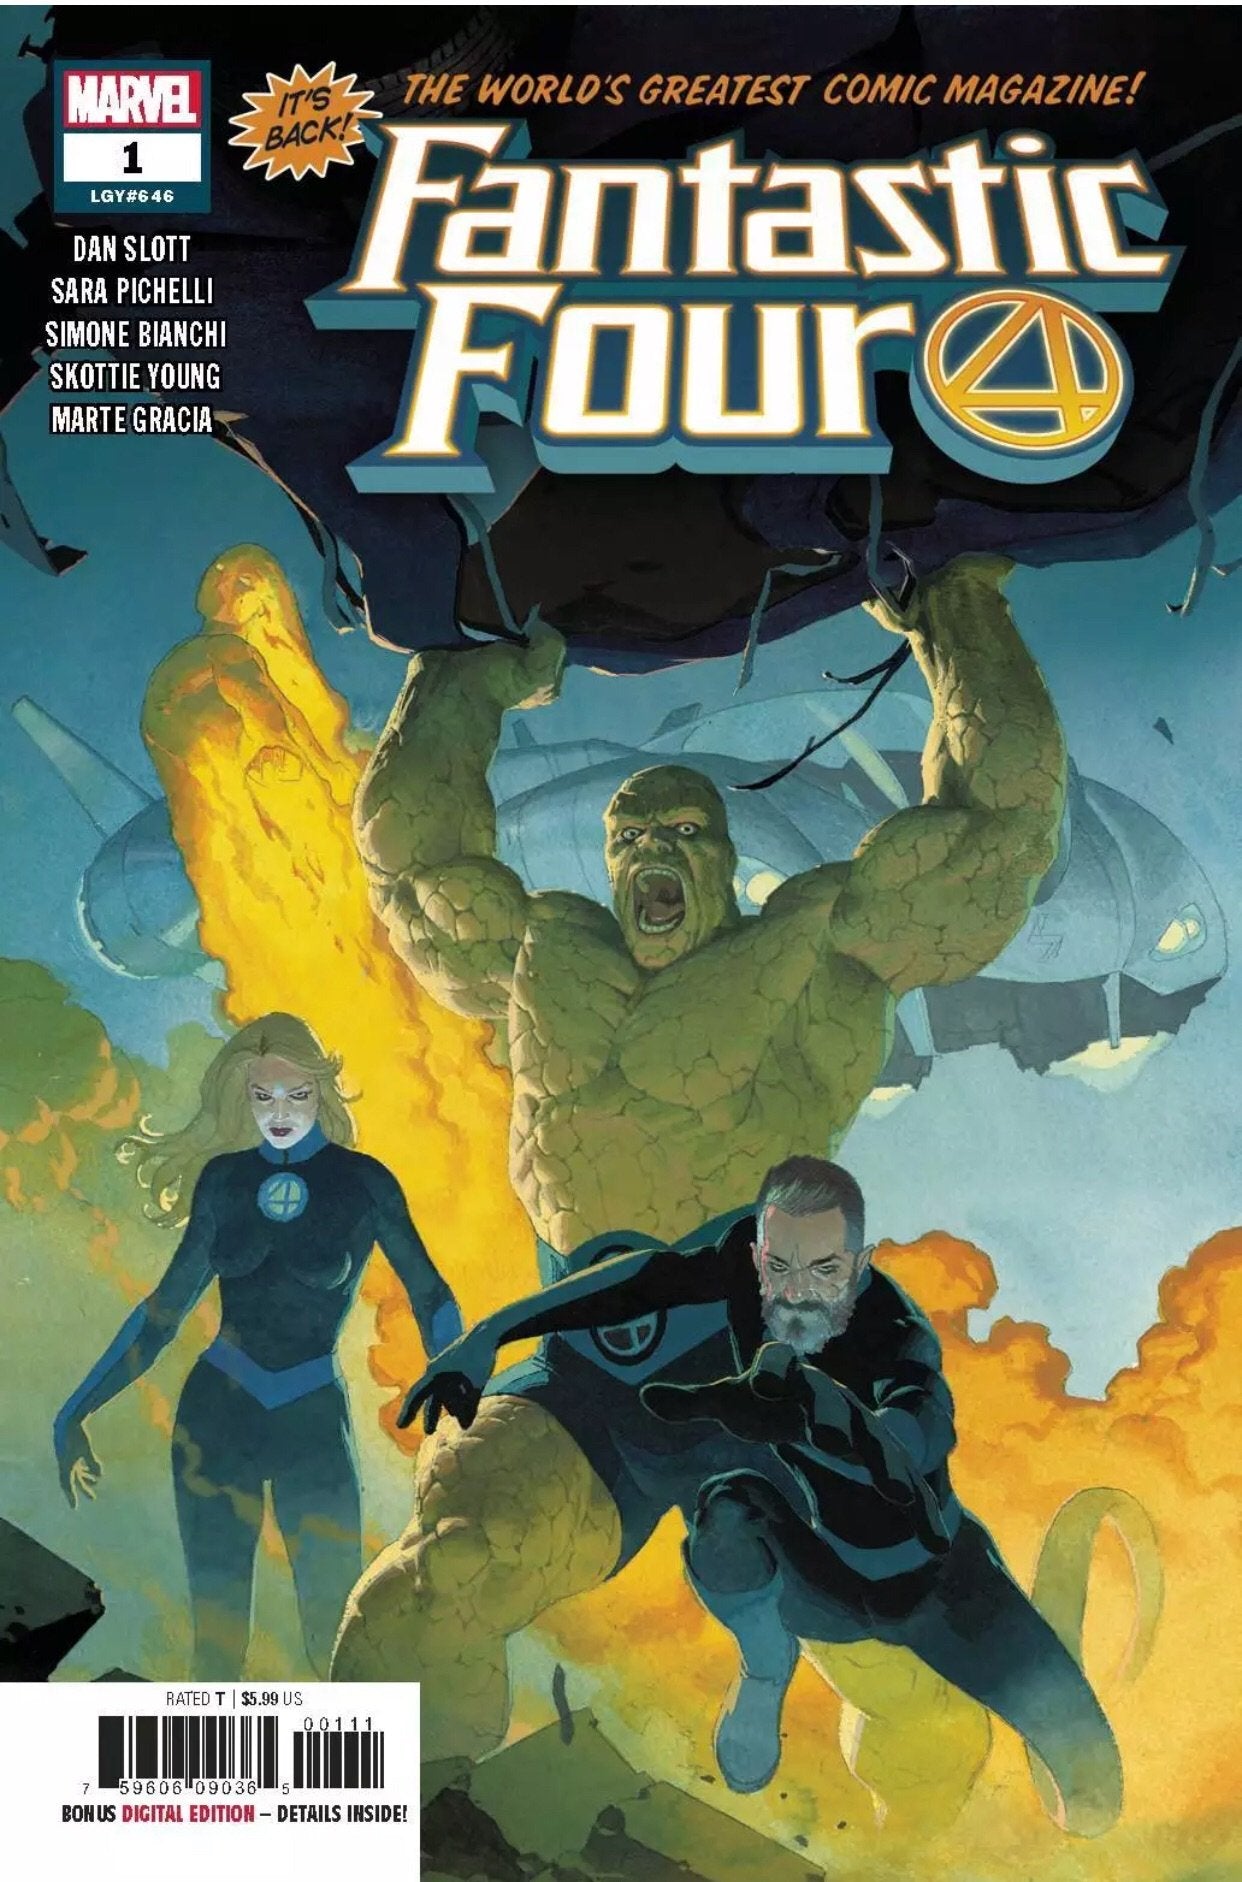 FANTASTIC FOUR #1 2018 COMIC CON AFRICA COLOR VARIANT COVER BY SLINEY W/ FREE REGULAR COVER